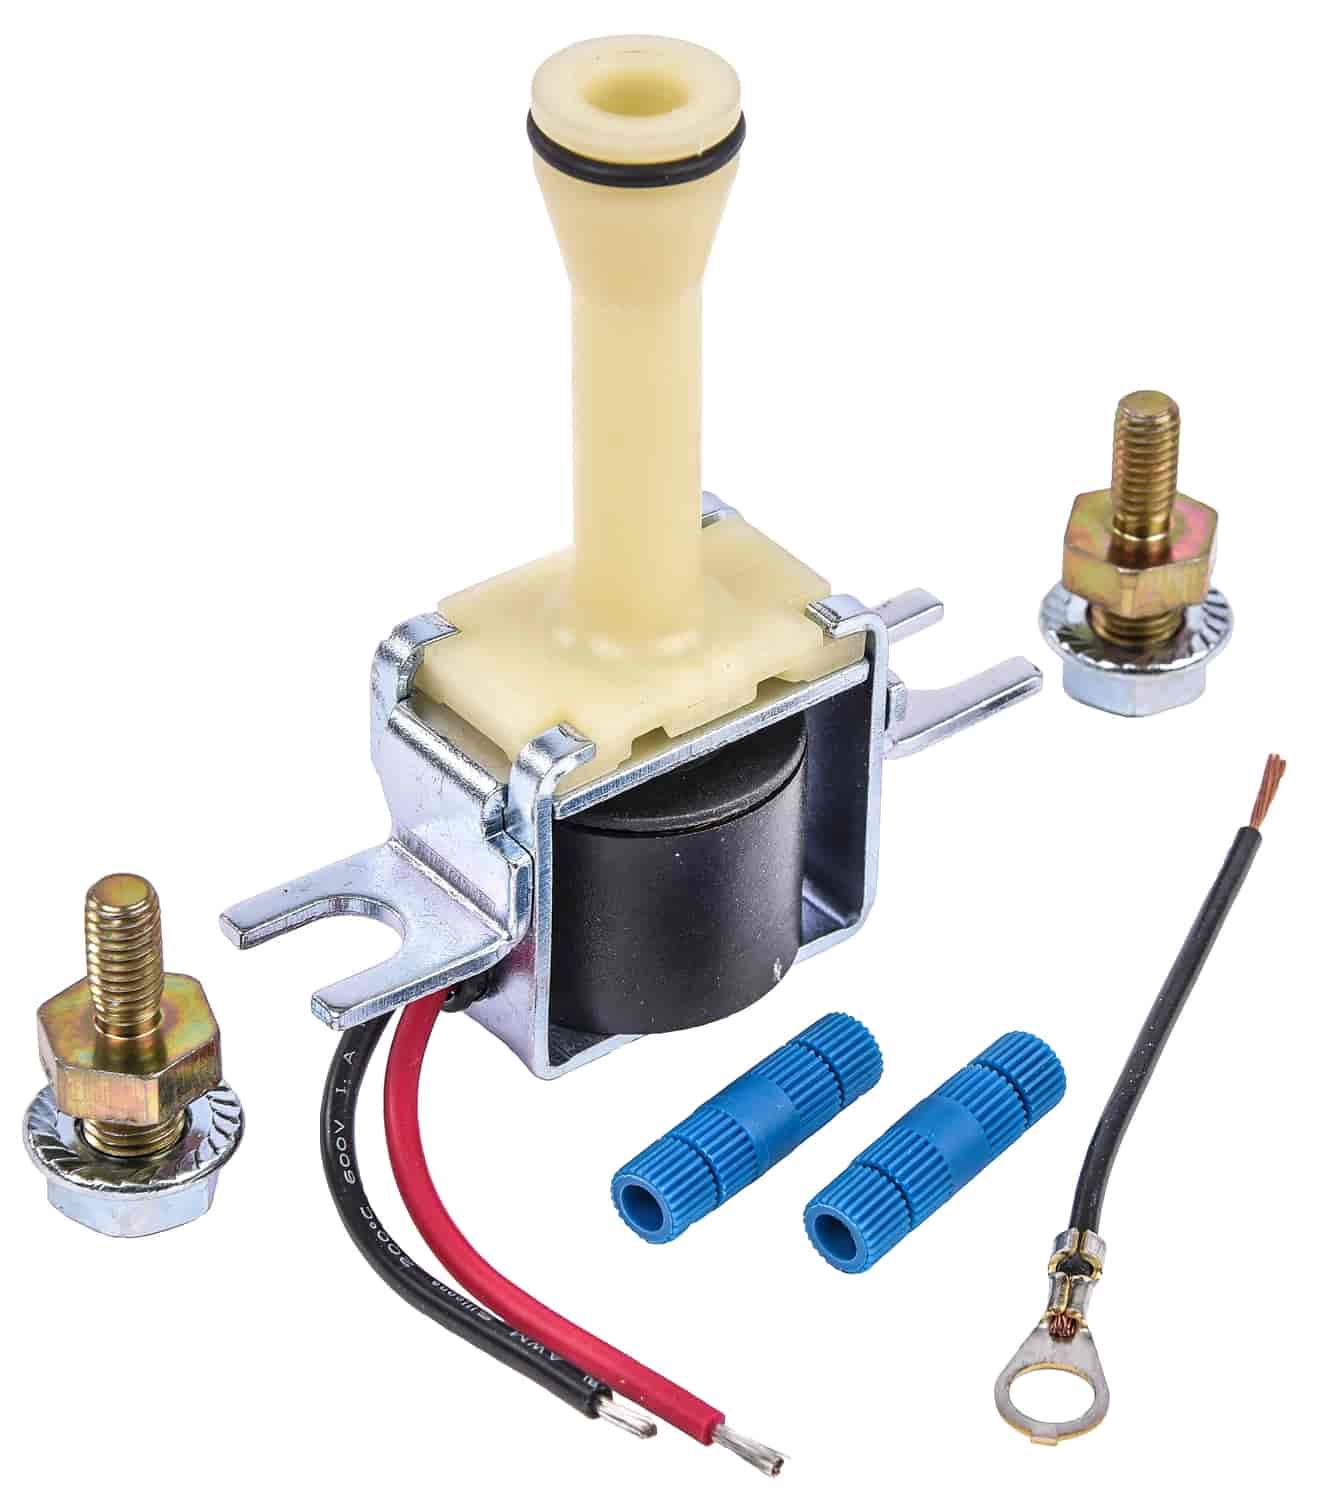 Lock-Up Solenoid Replacement for GM 700-R4, 200-4R, and